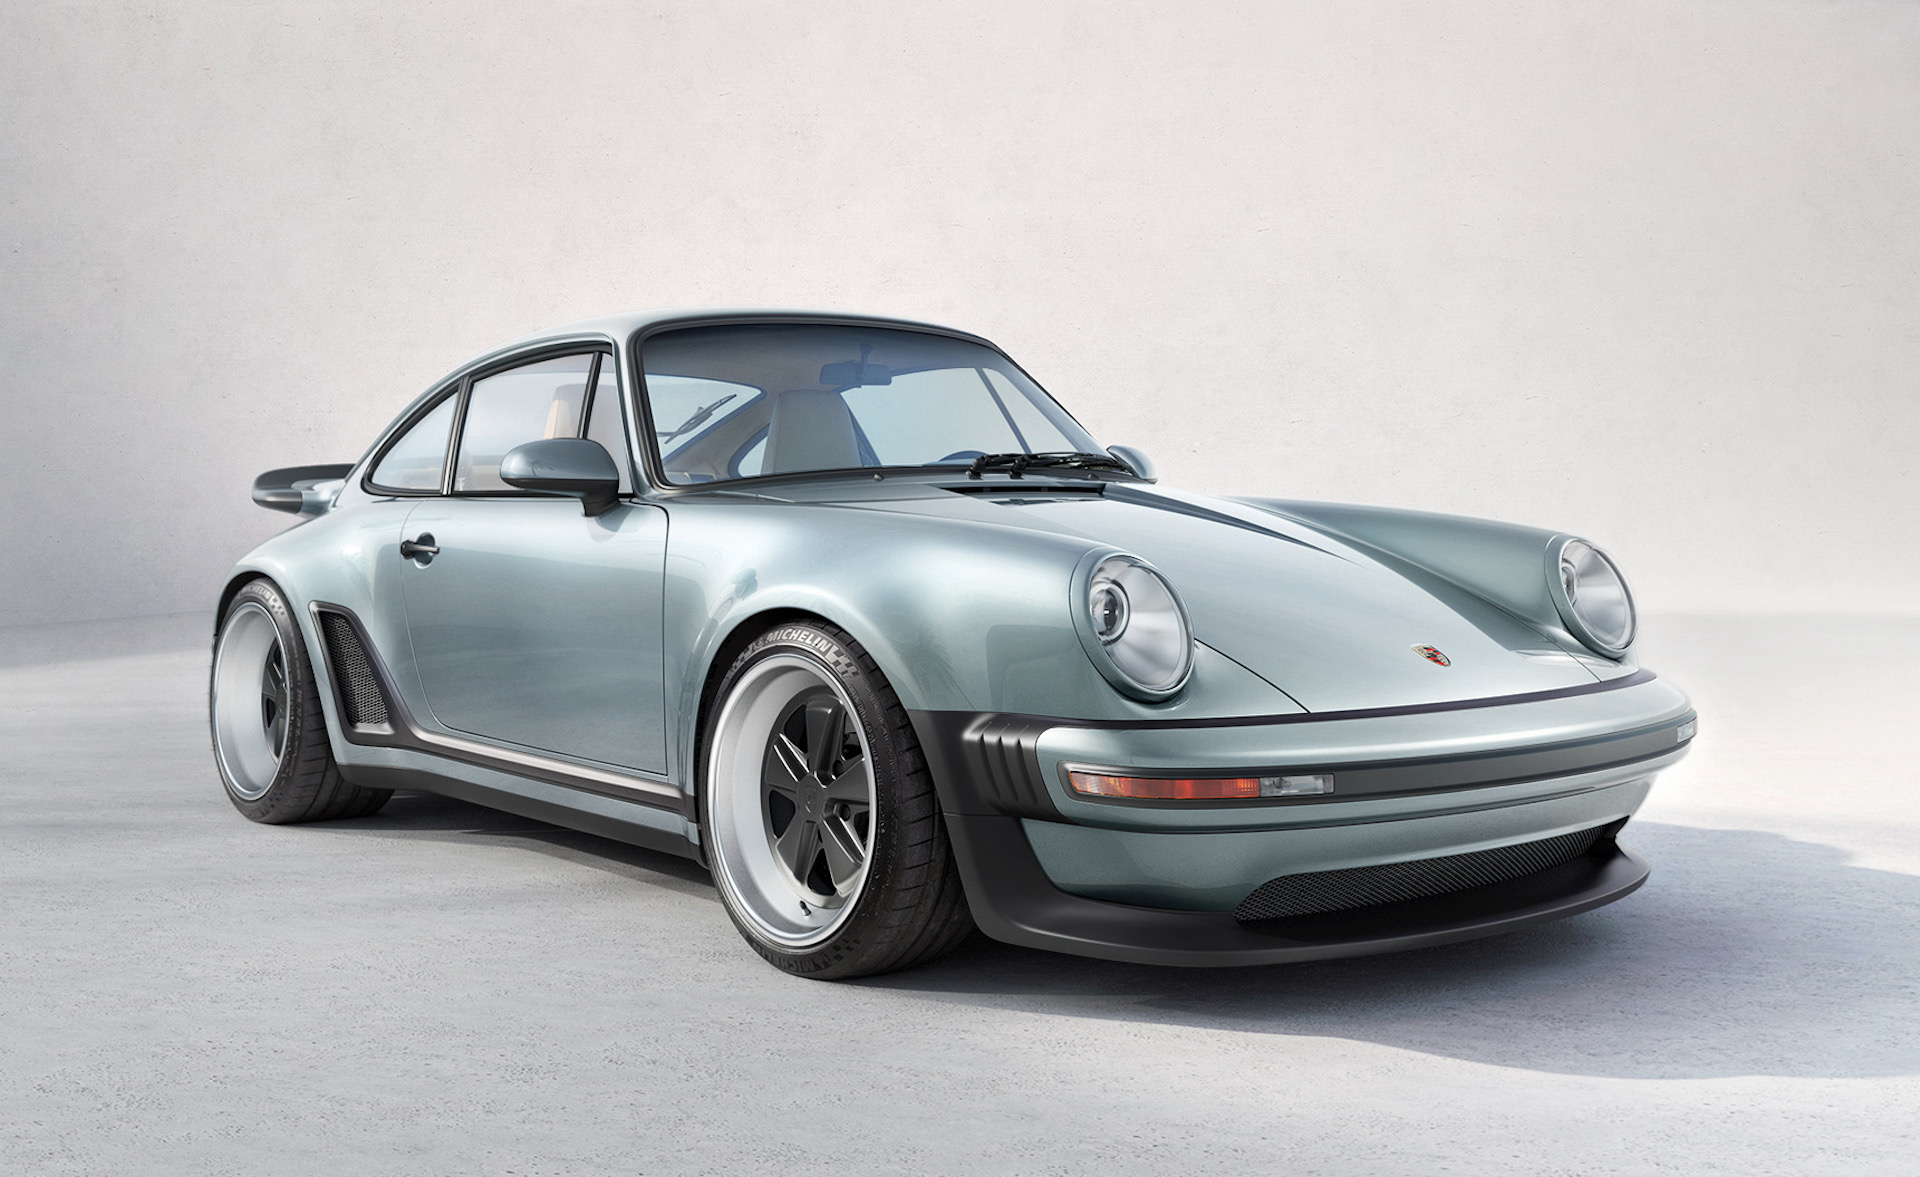 Singer debuts mouth-watering ‘Turbo Study’, based on 964 Porsche 911